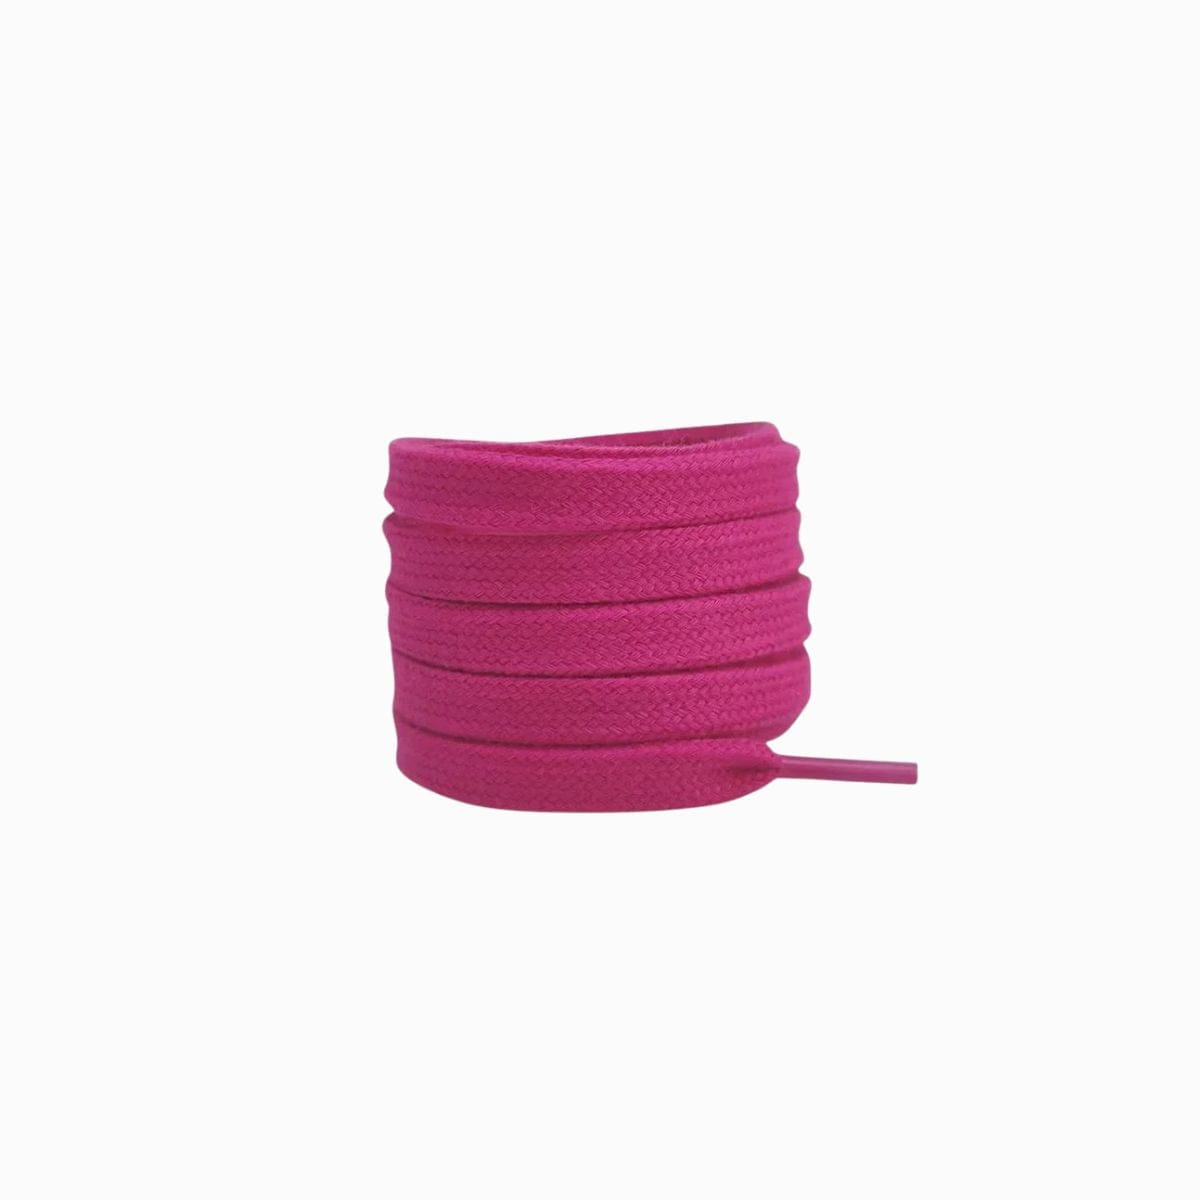 Rose Pink Replacement Adidas Shoe Laces for Adidas Gazelle Sneakers by Kicks Shoelaces